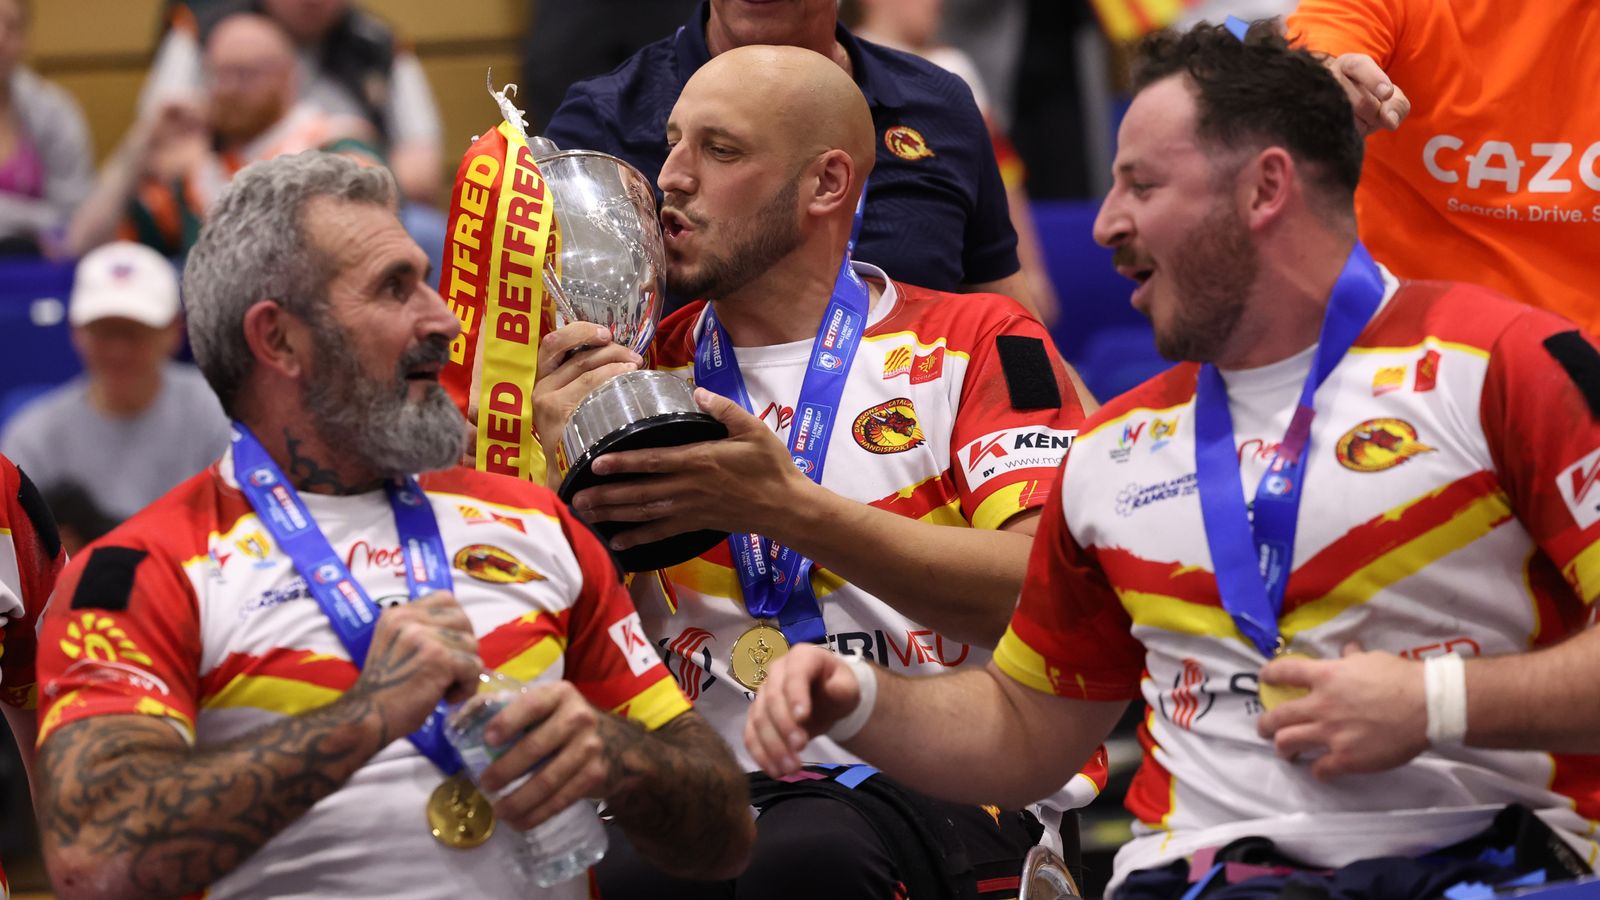 Wheelchair Challenge Cup: Catalans Dragons beat Wigan Warriors 81-18 to retain trophy | Rugby League News